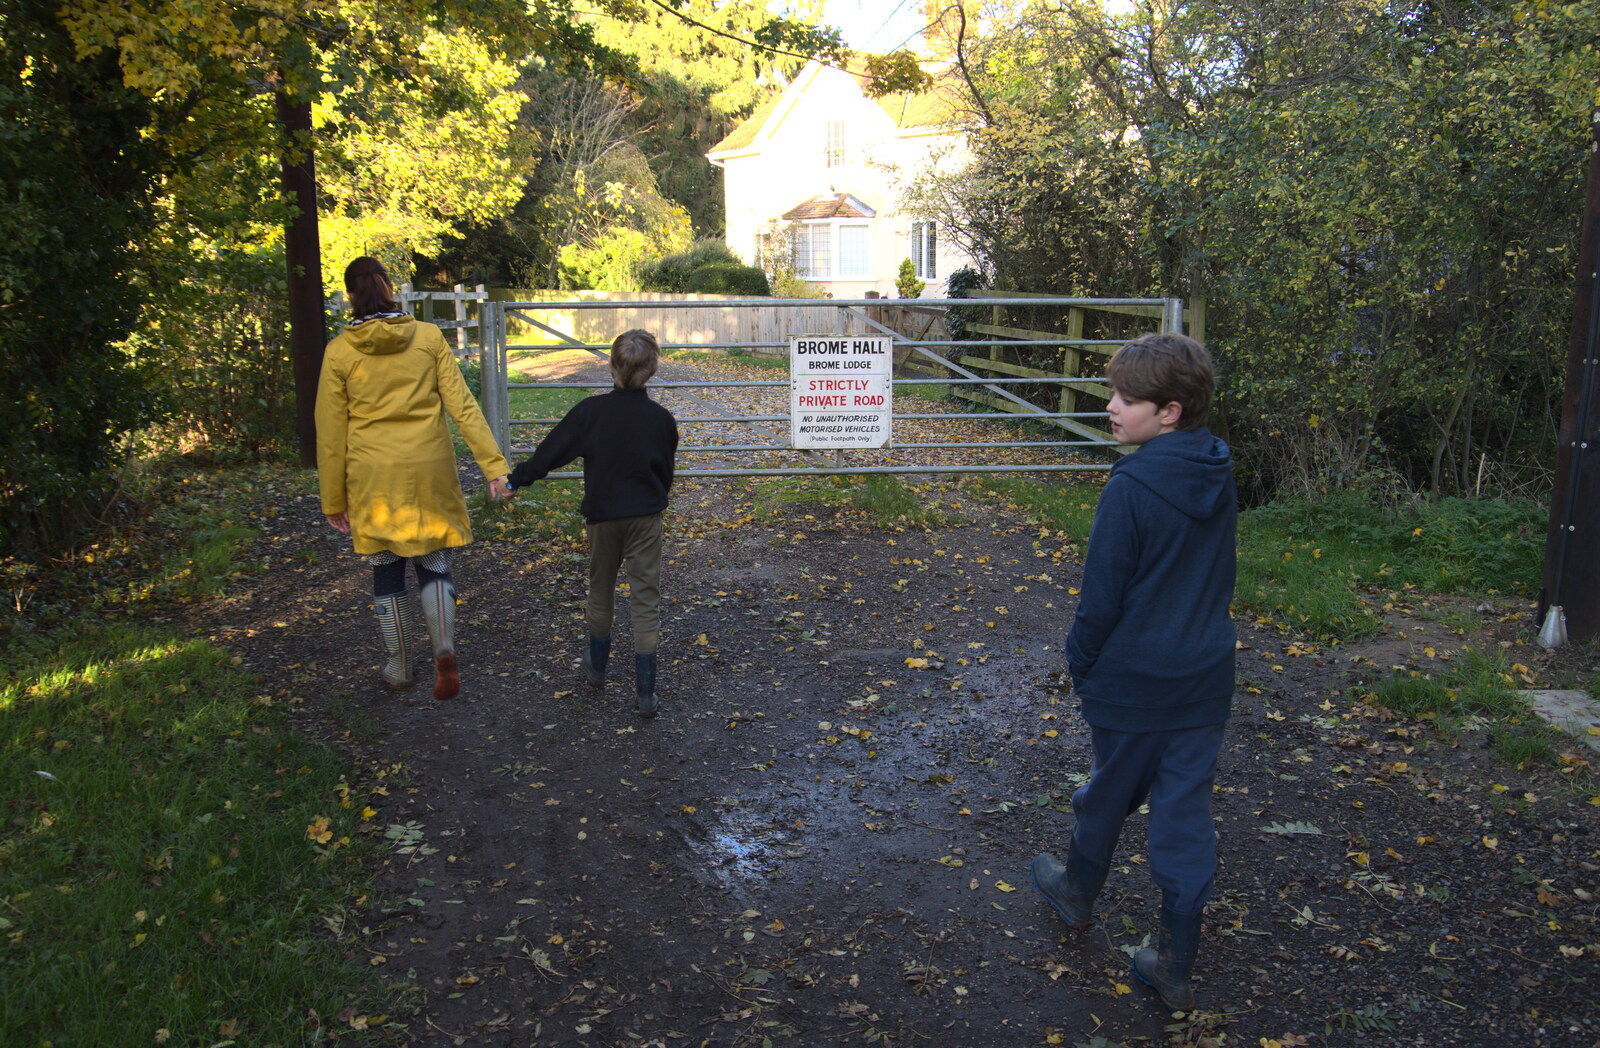 We reach the gate on the Avenue from A Walk Around the Avenue, Brome, Suffolk - 25th October 2020